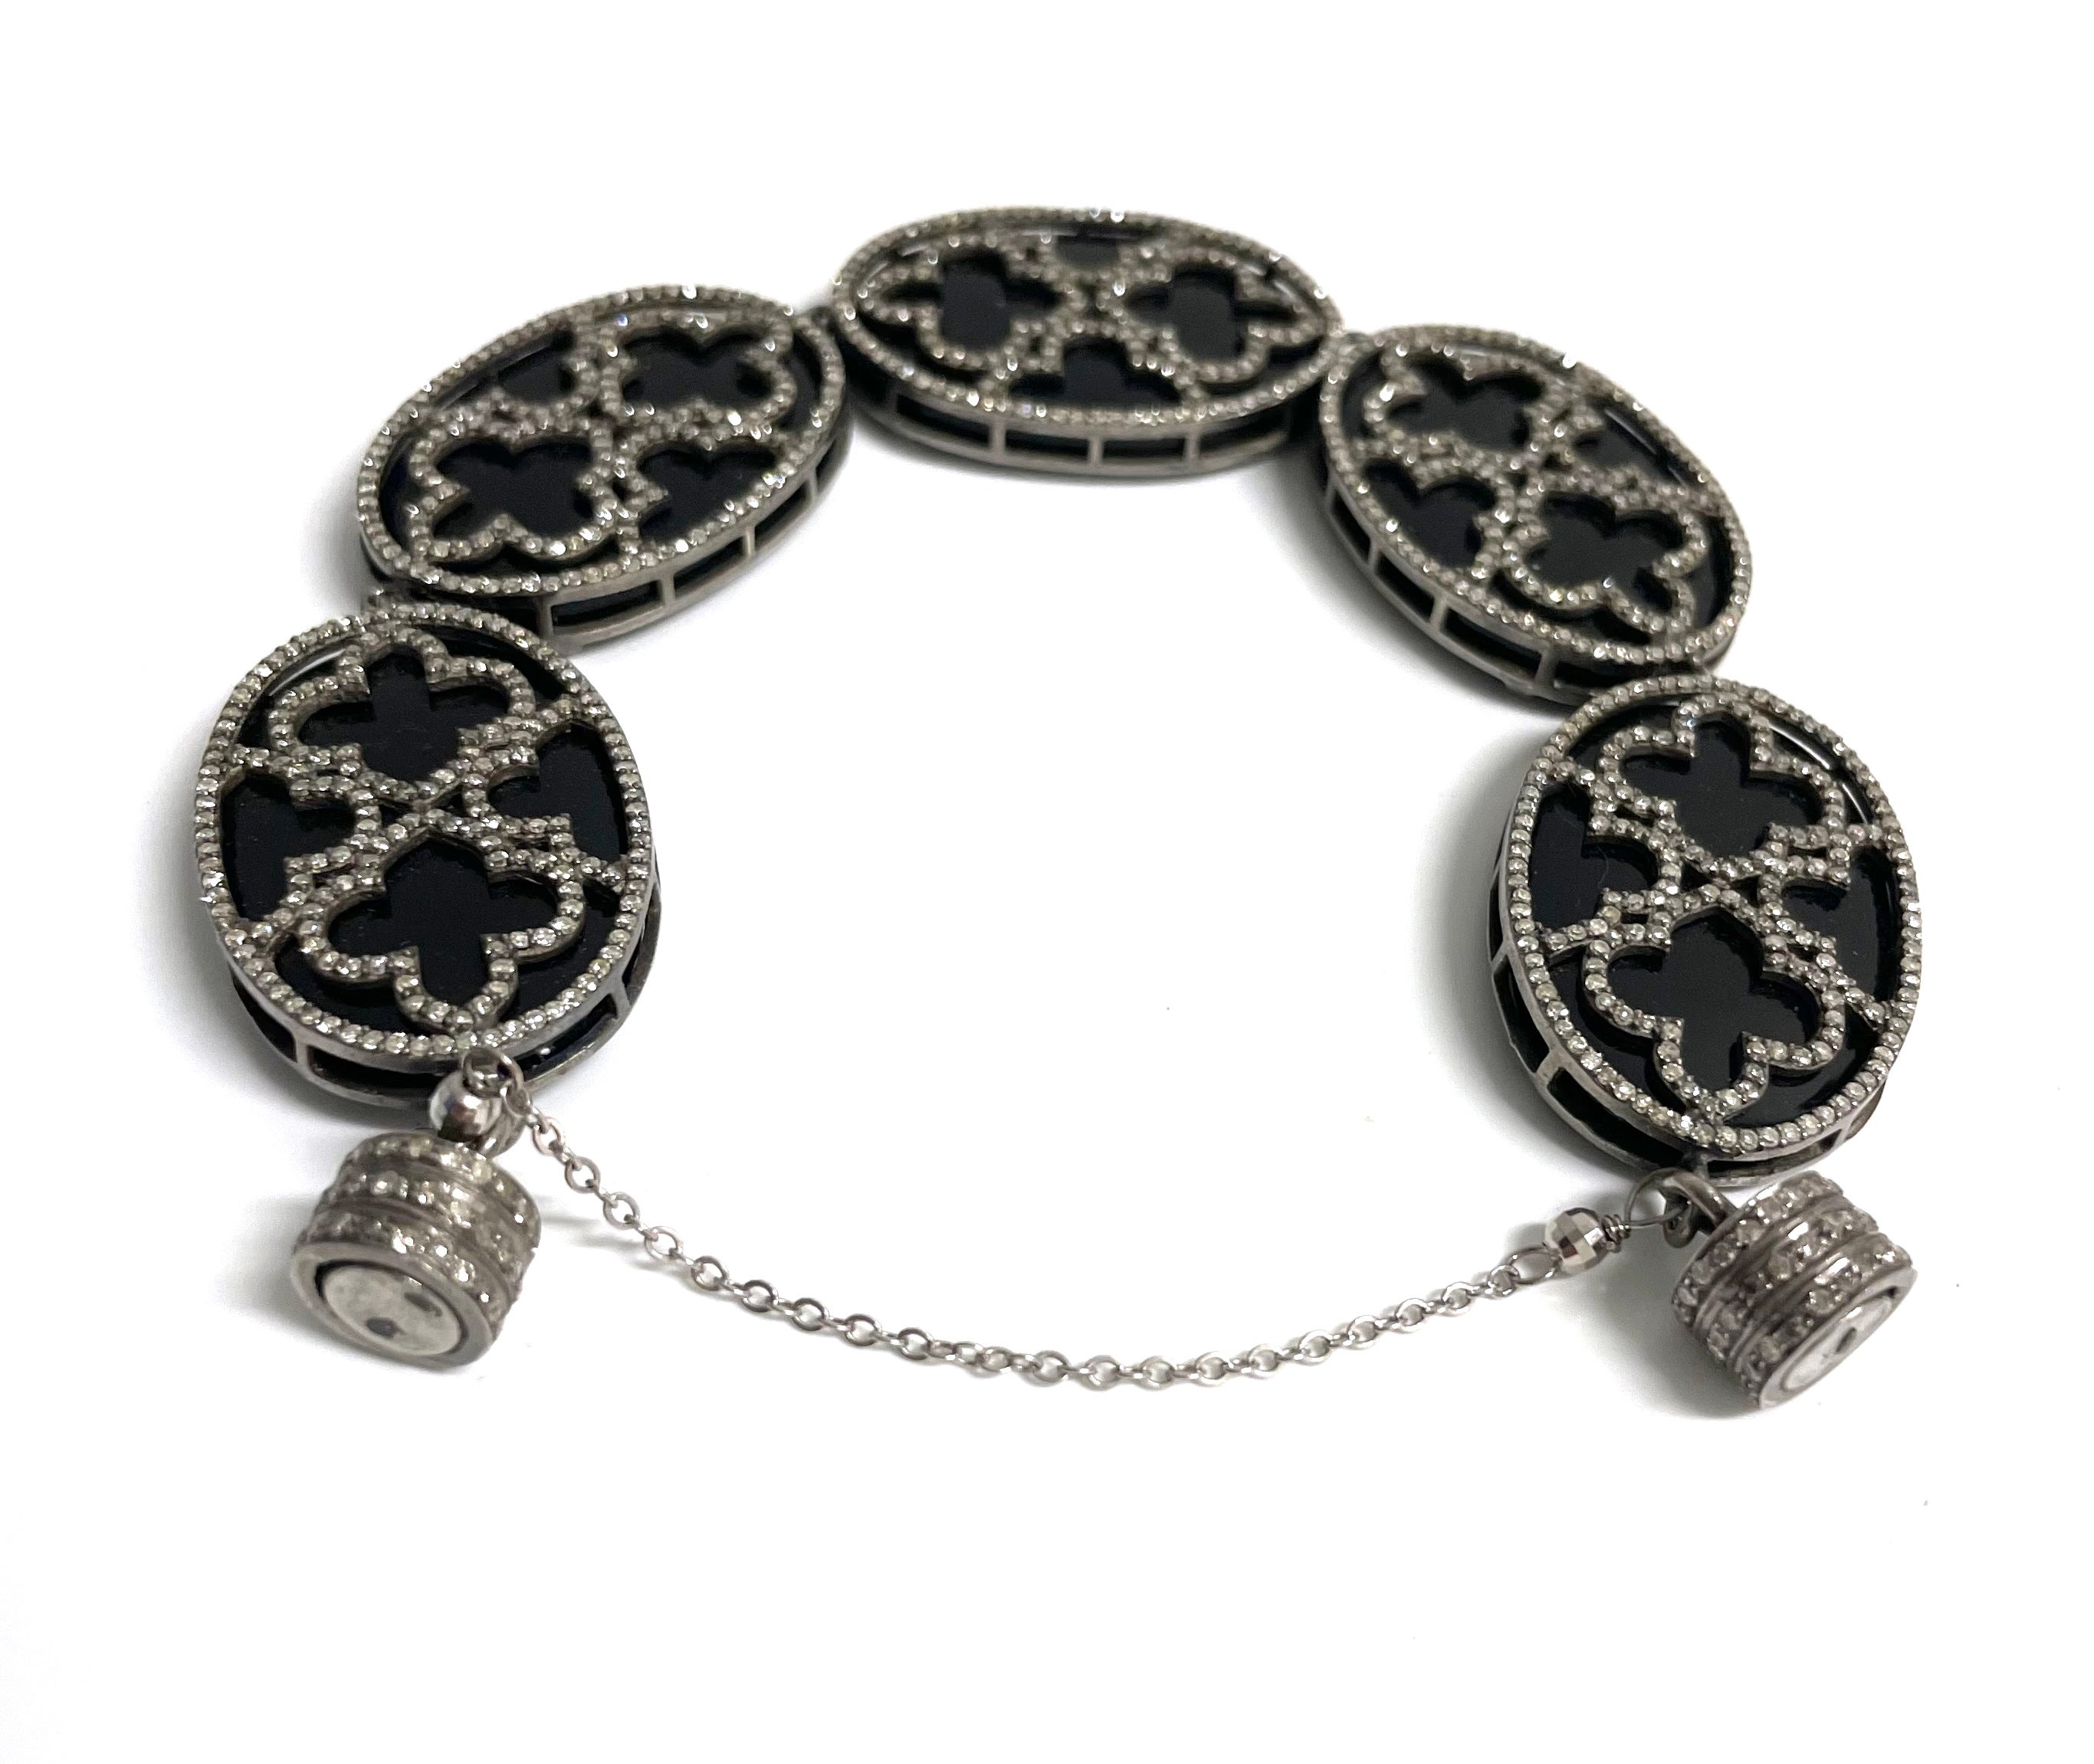 Description
Wearing this exquisite bracelet delights your sense of art and style and draws you back to the captivating and mystical beauty of Alhambra Spain, where East meets West in art and architecture. Its allure lies in the cleanly structured,